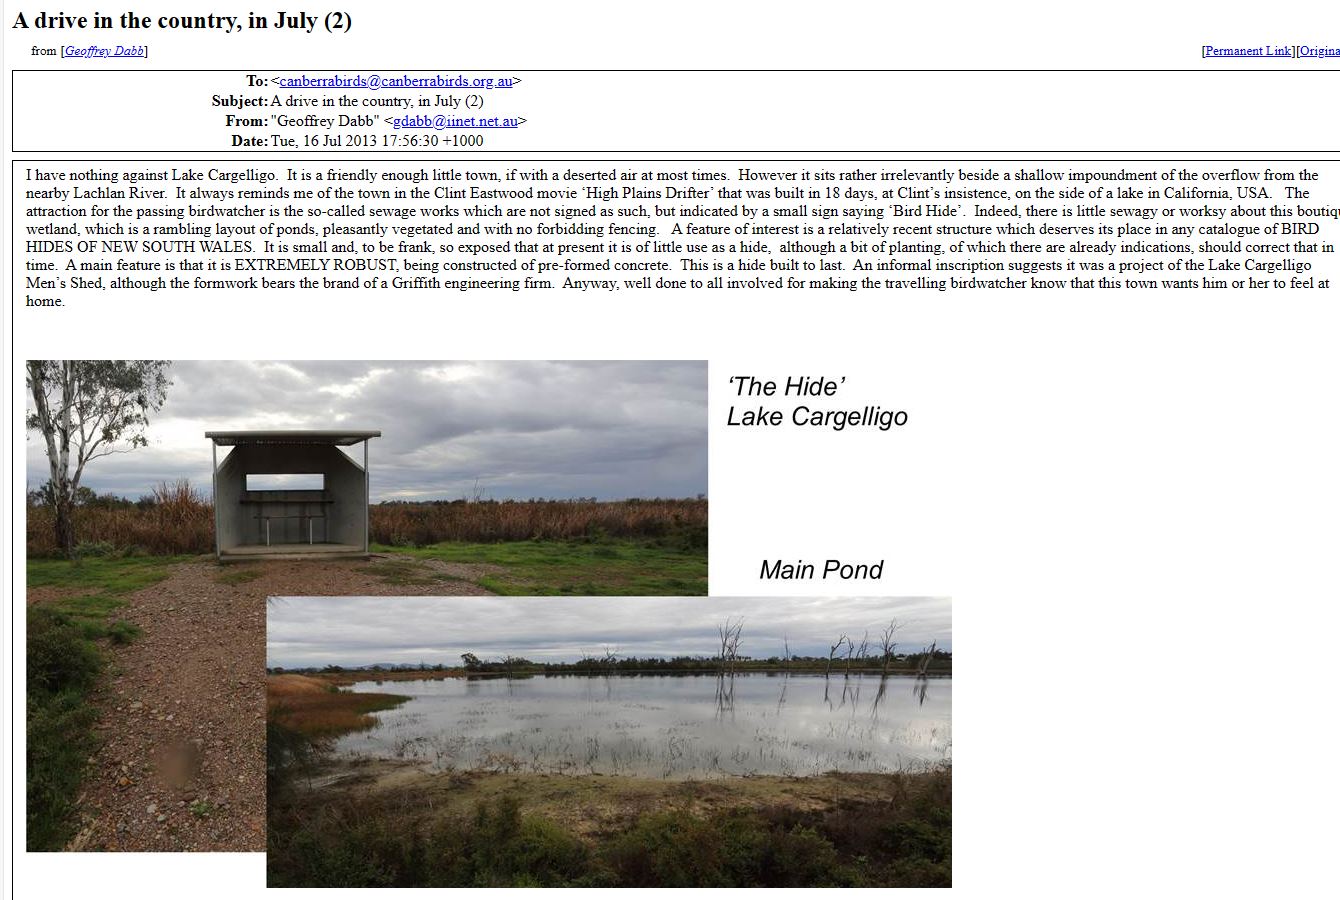 A close-up of a pond

Description automatically generated